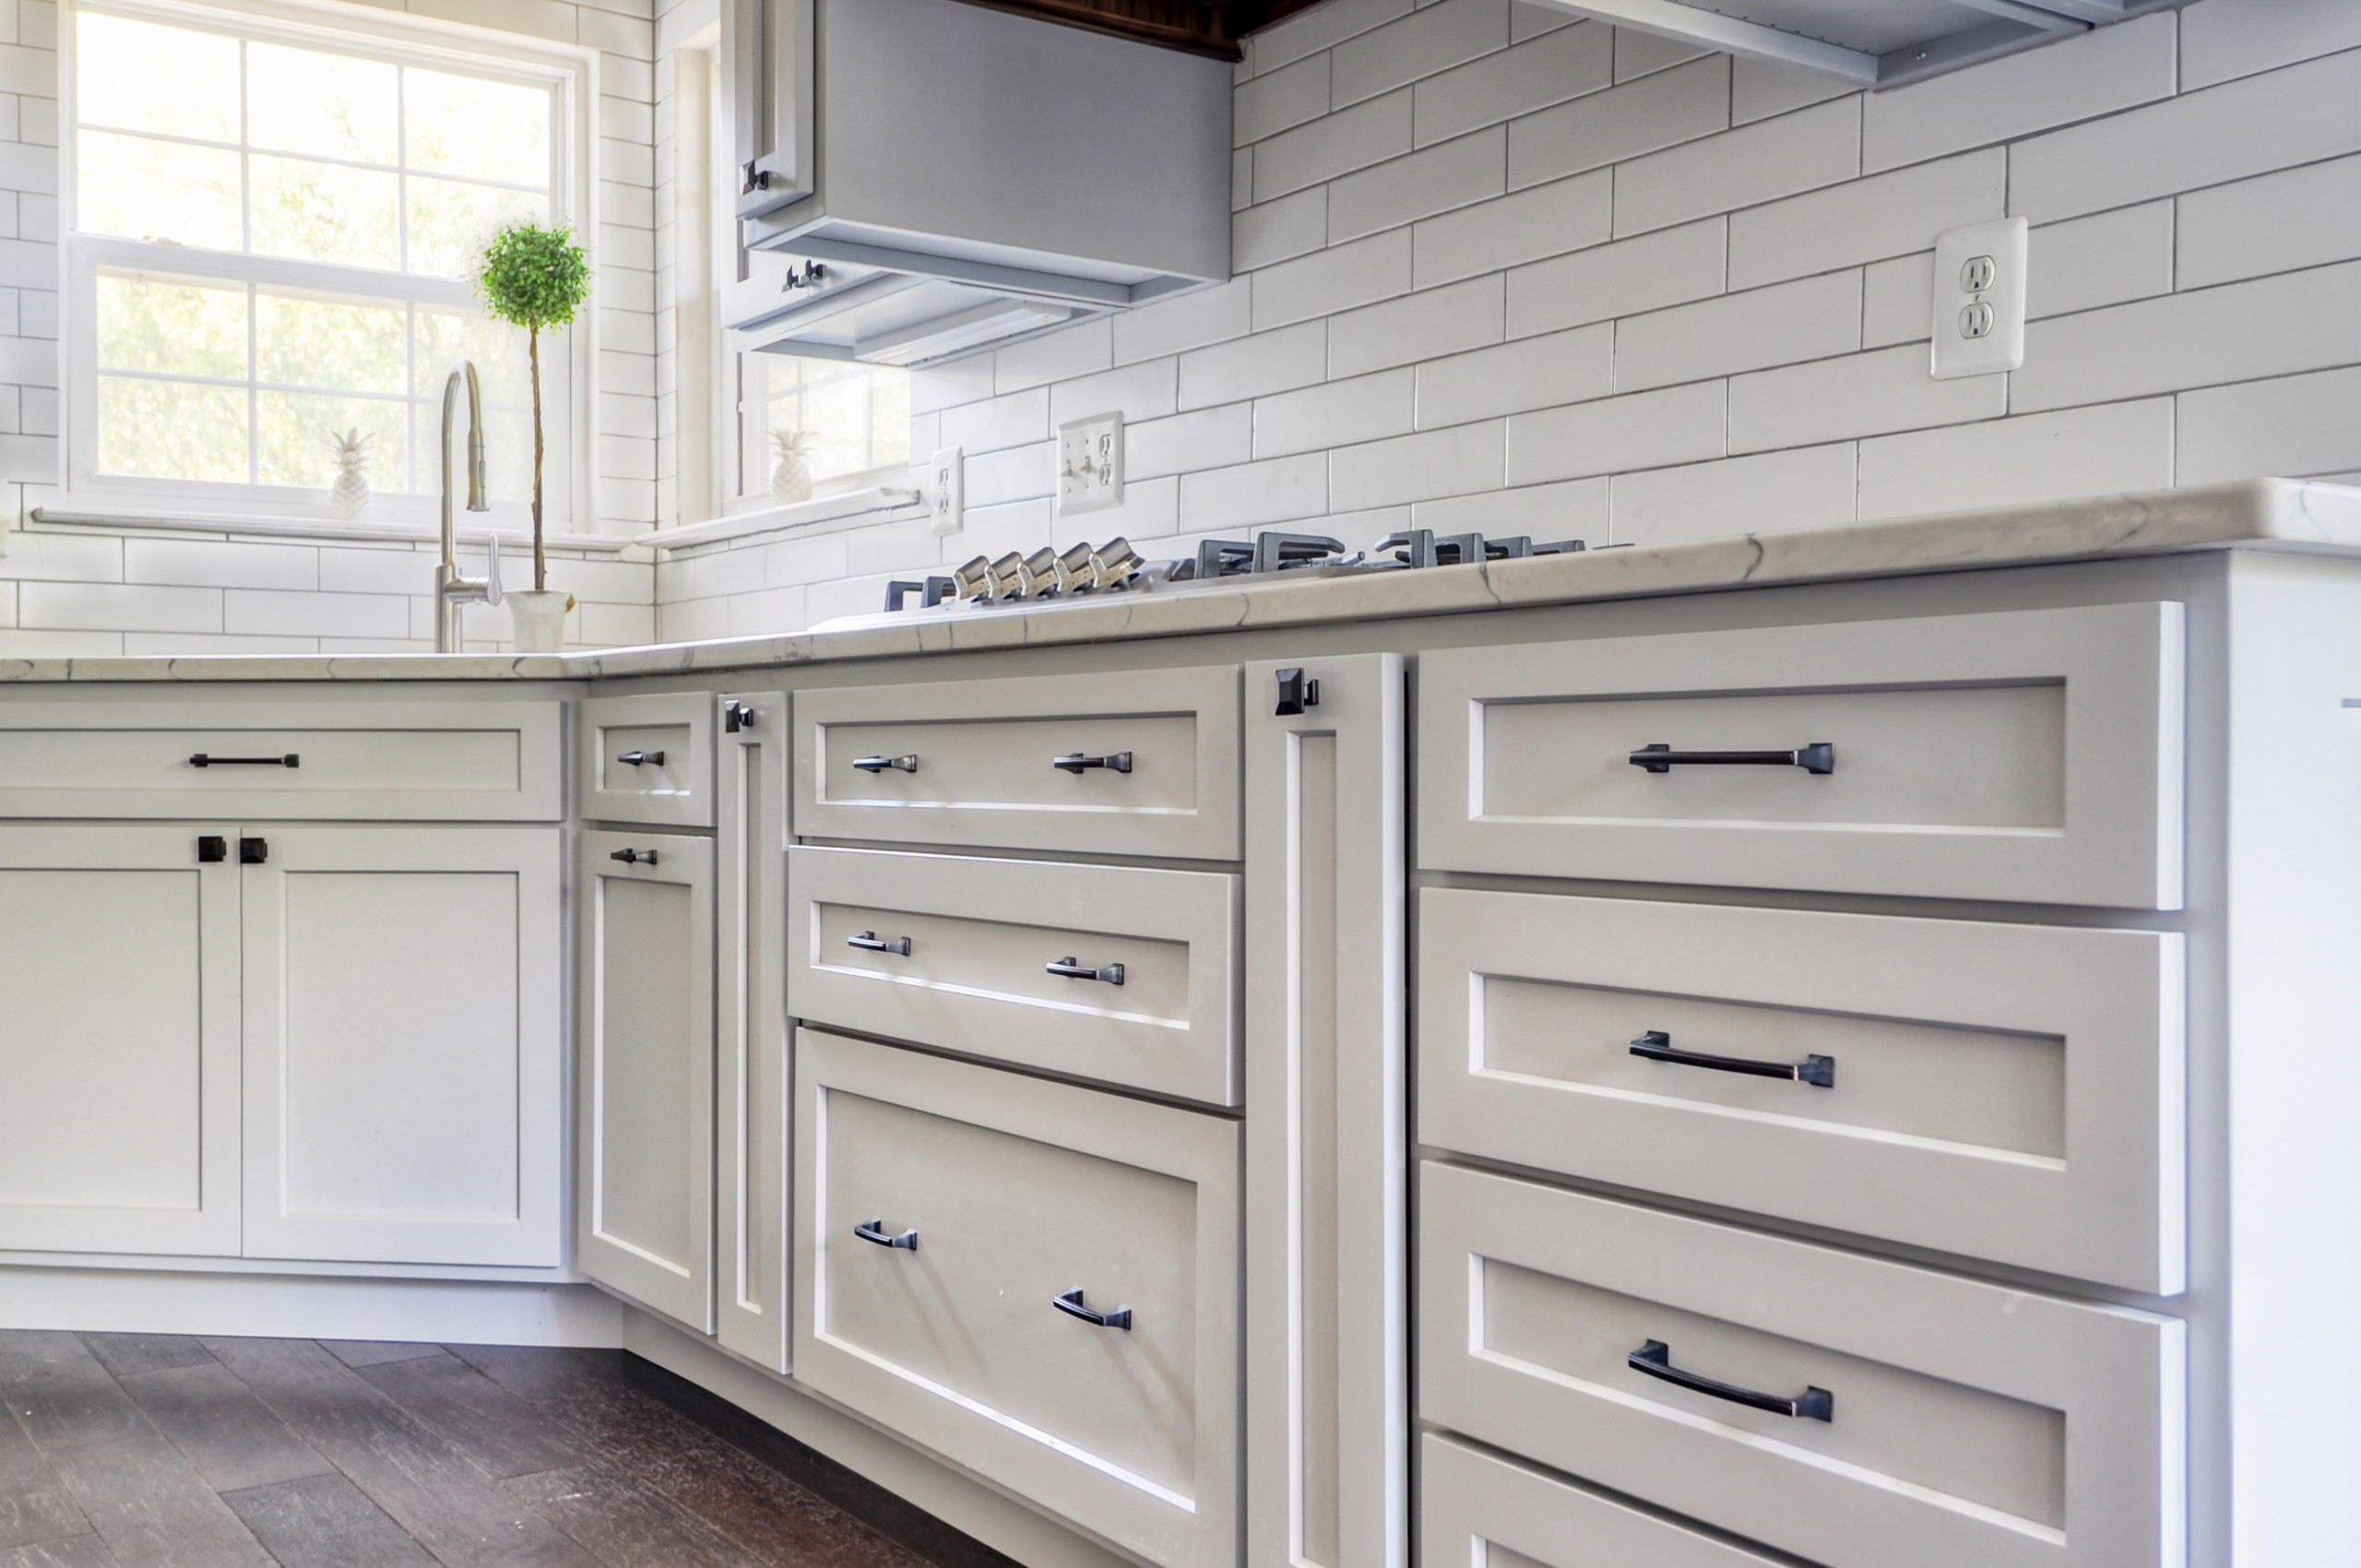 Storm (AF-700) Gray Painted Cabinets with Warm Natural Walnut Accents